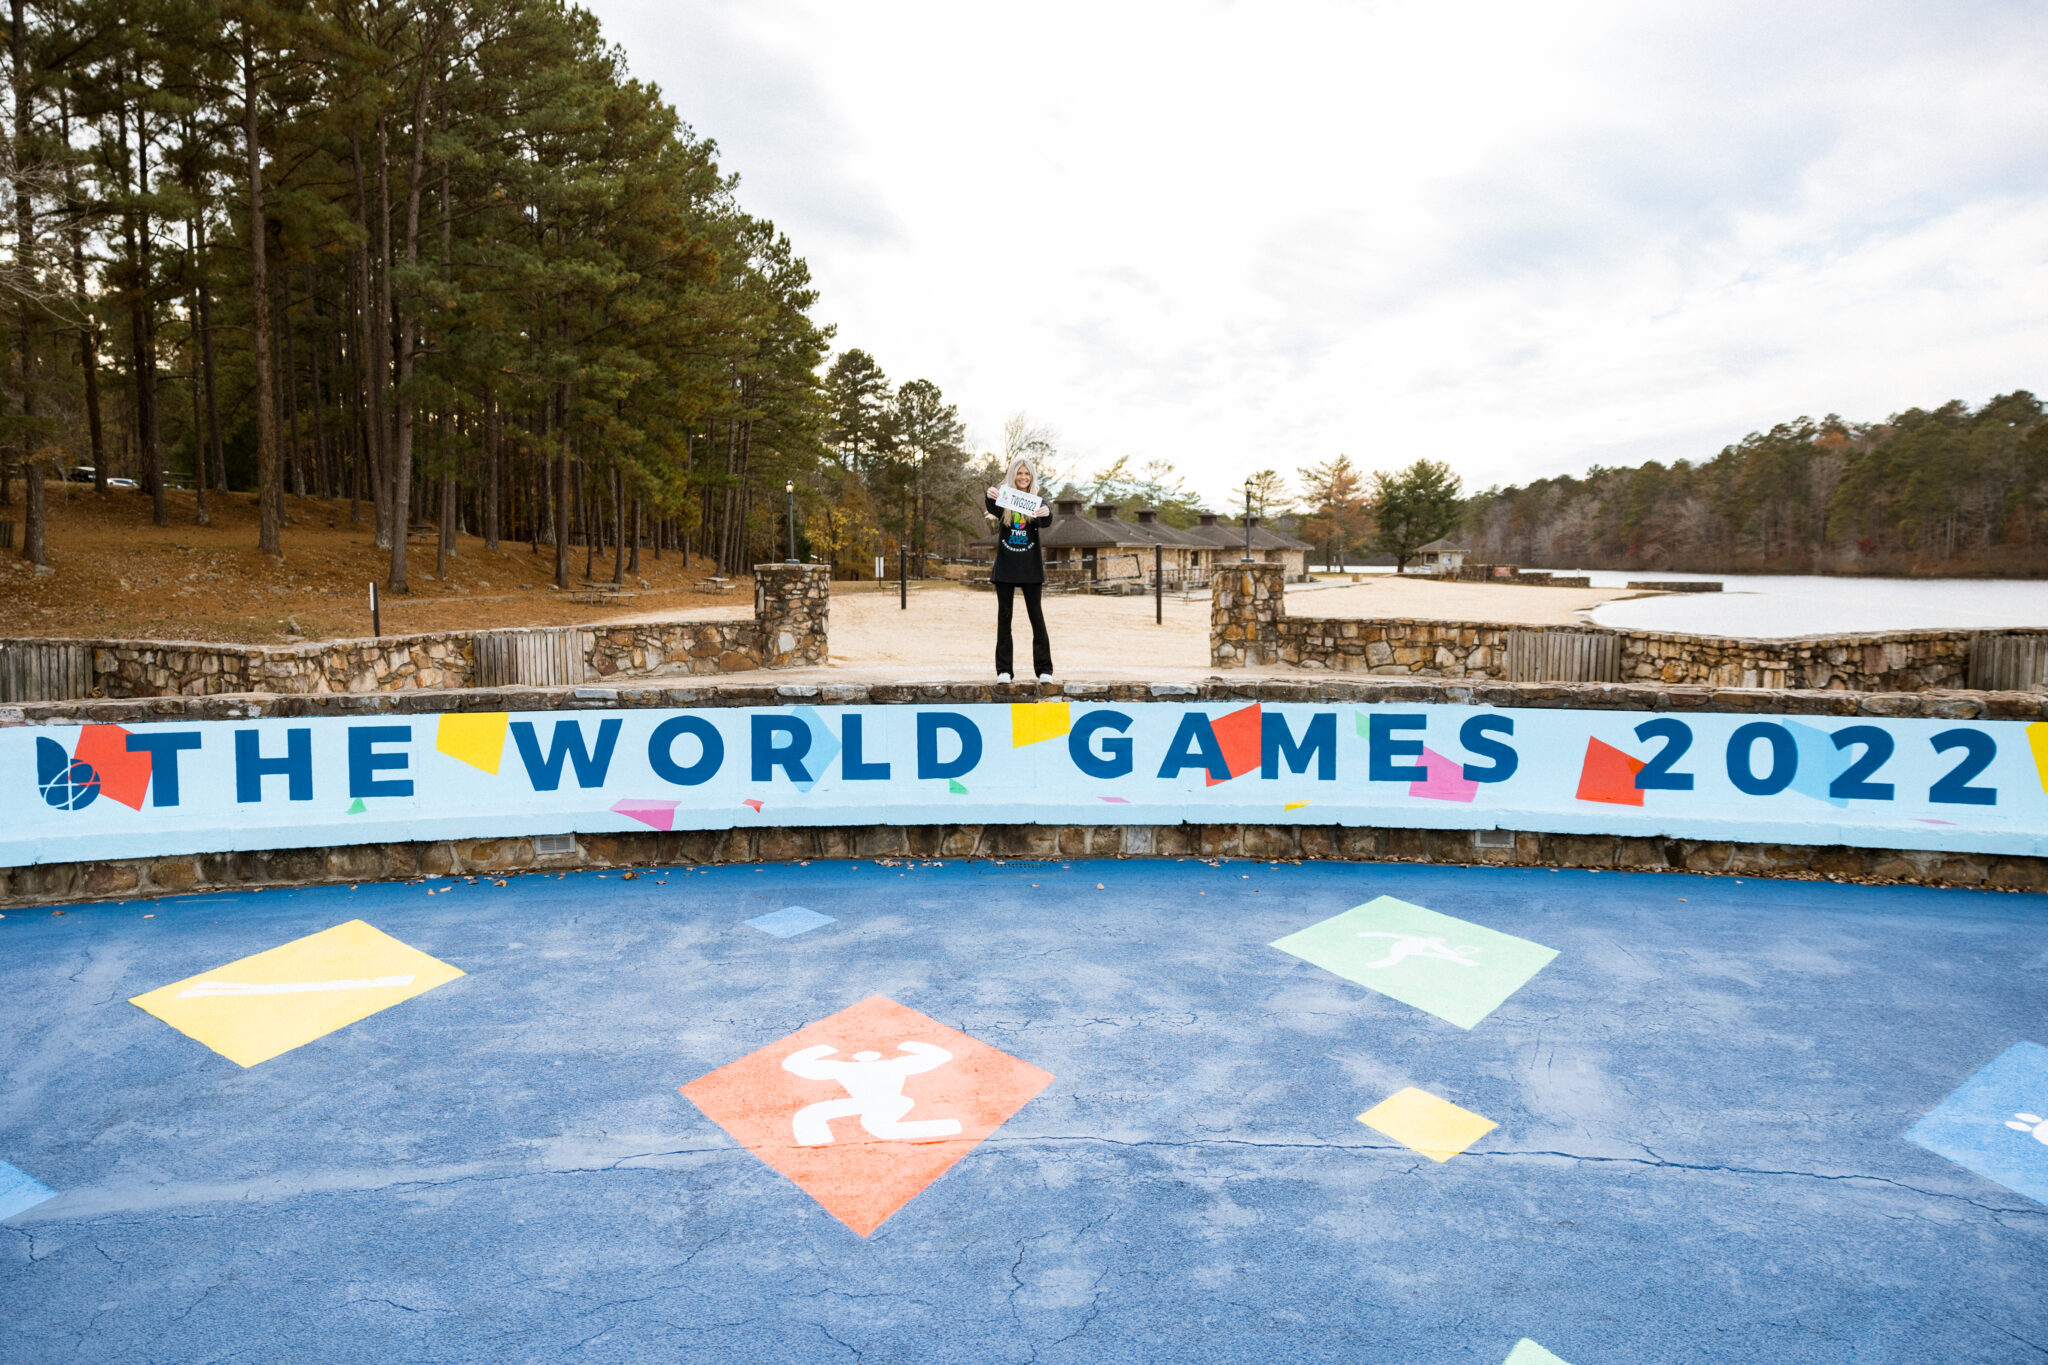 The 2022 World Games